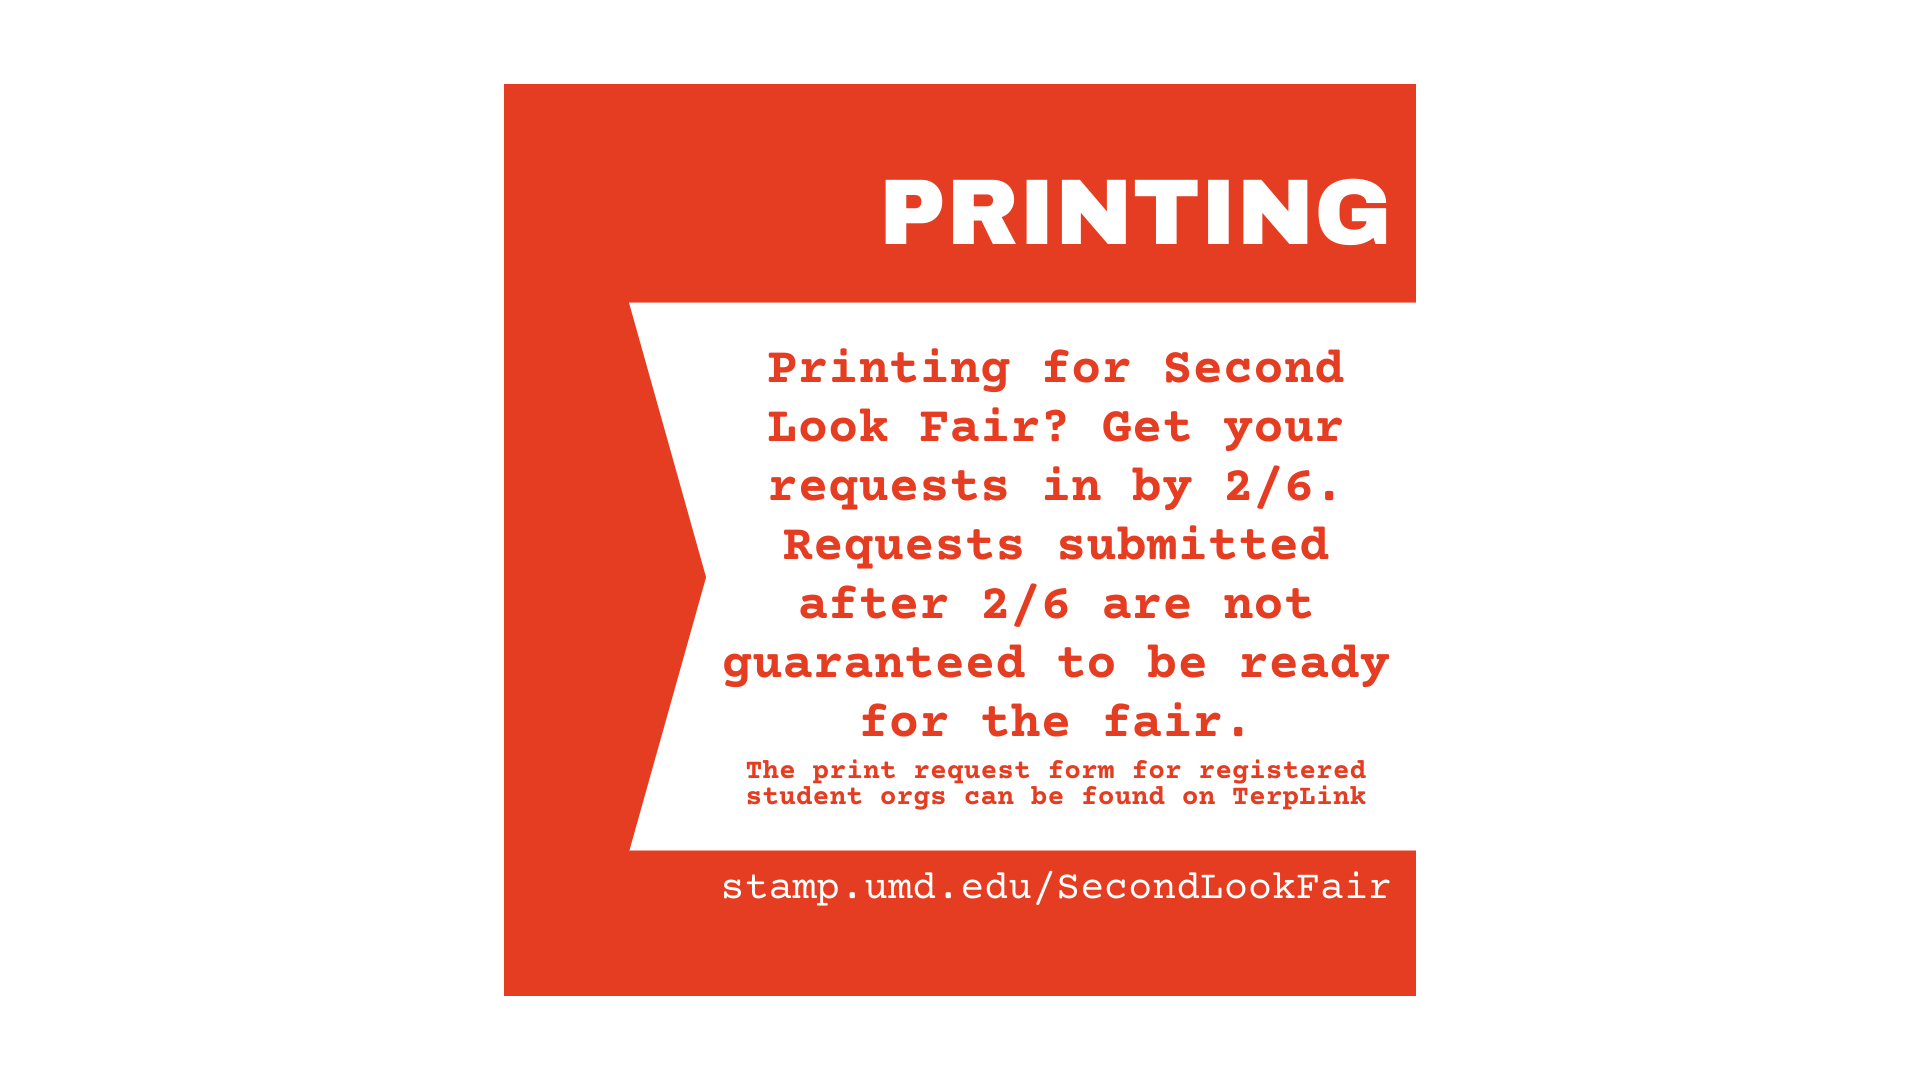 Print requests submitted by 2/6 are guaranteed in time for First Look Fair